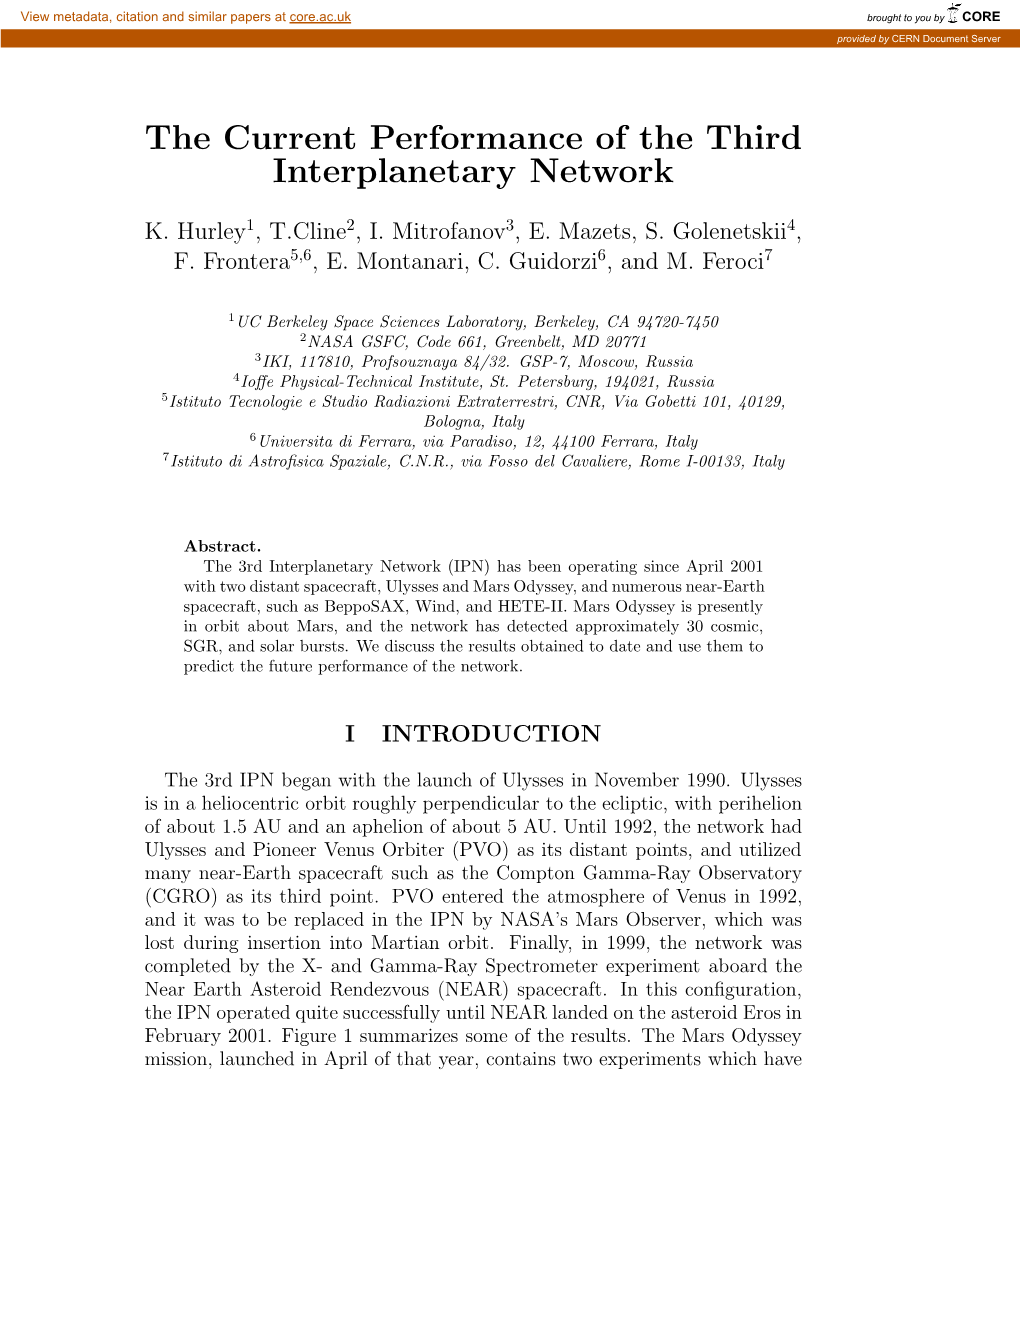 The Current Performance of the Third Interplanetary Network